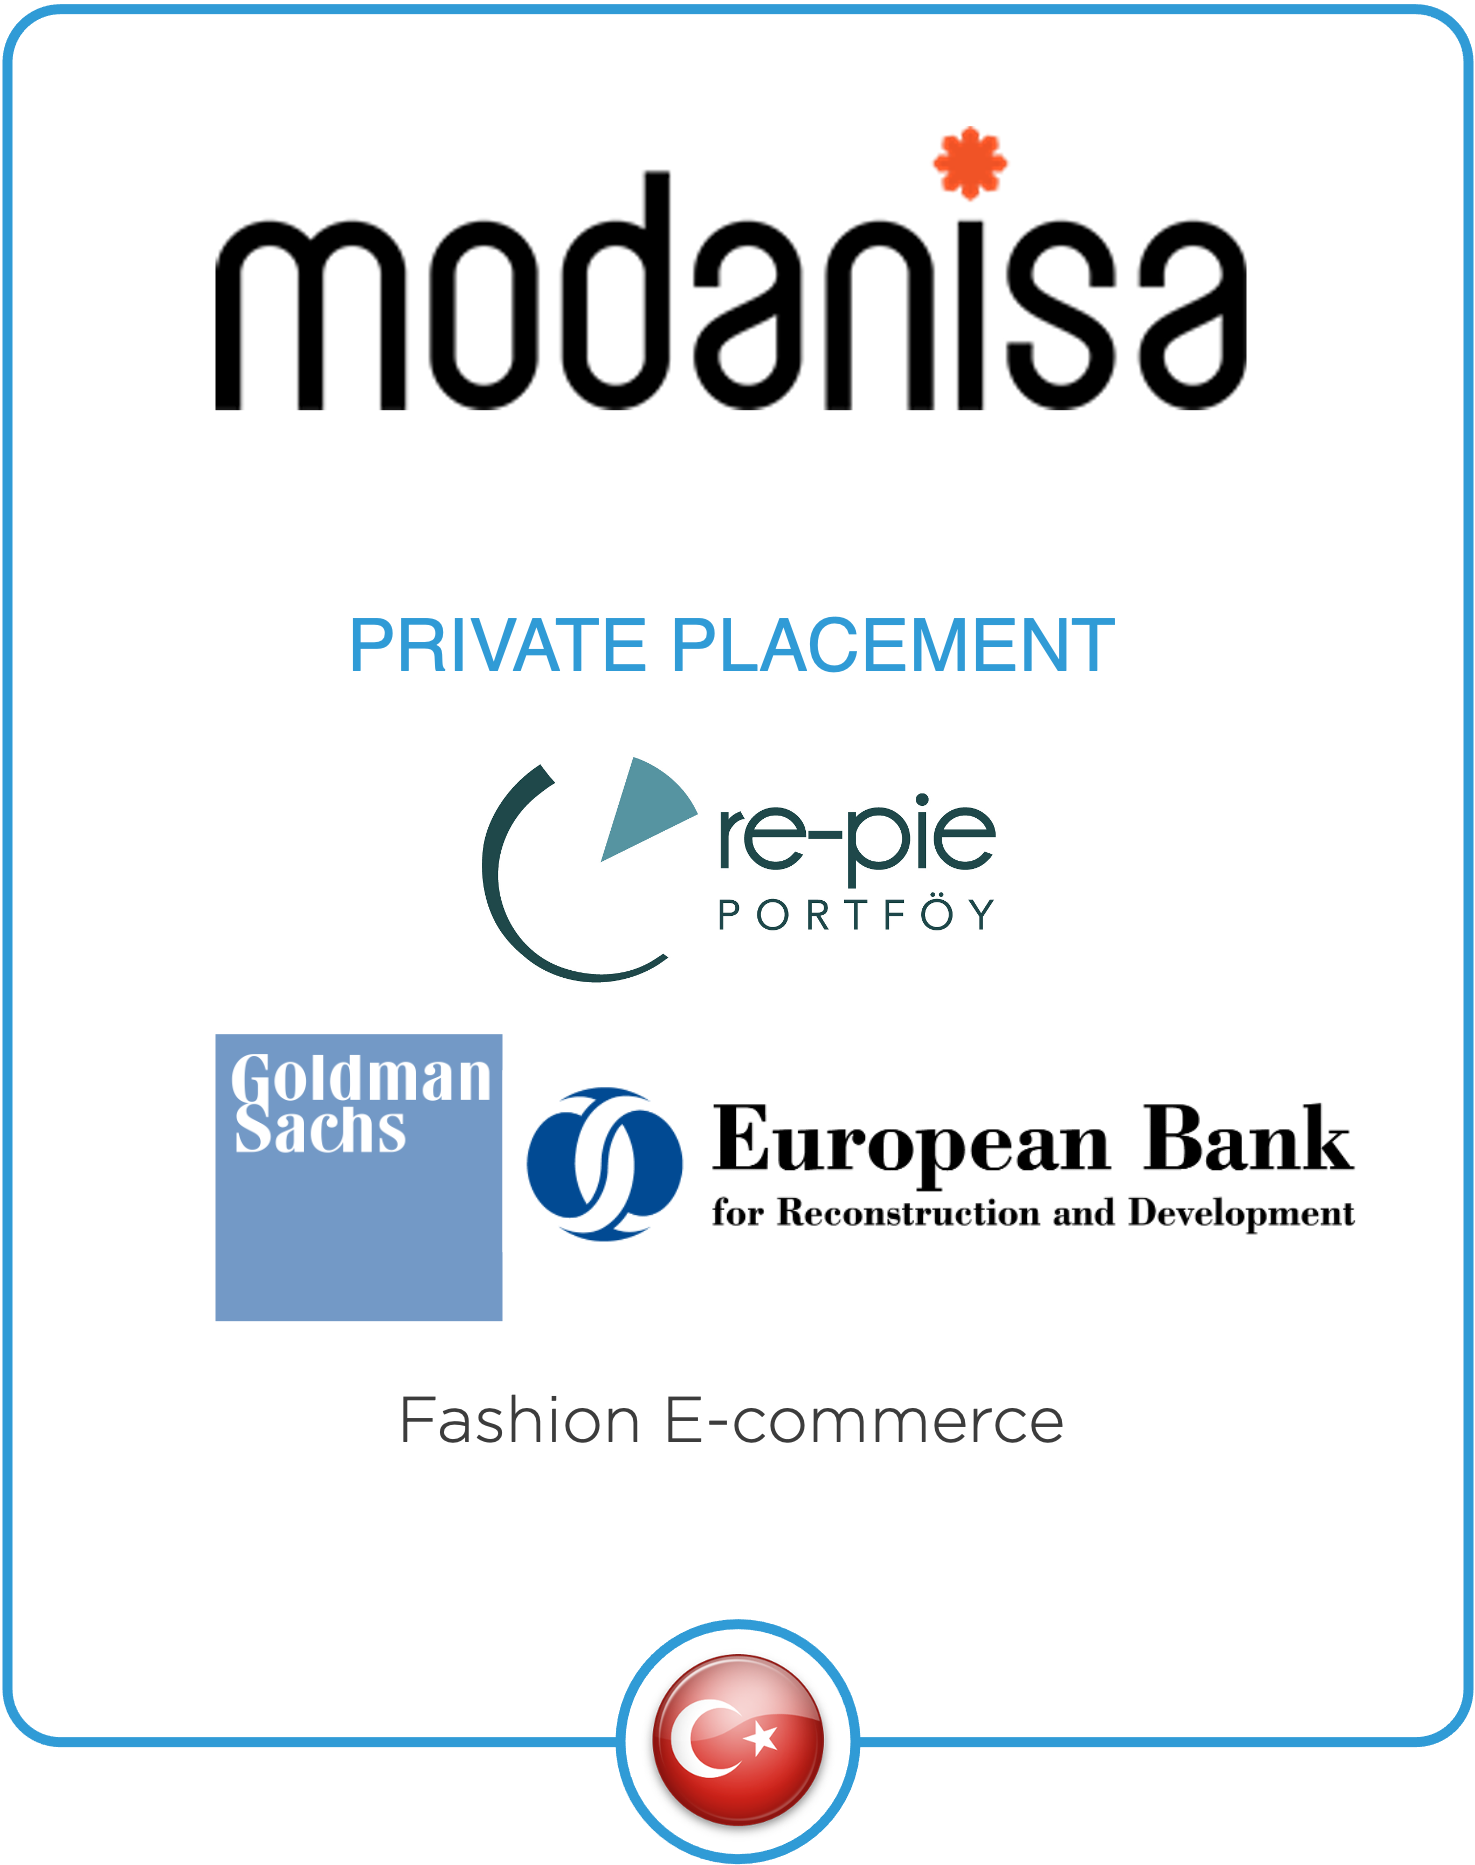 Drake Star Advises Modanisa, the Global Leader in Modest Fashion, on its Investment from Re-Pie